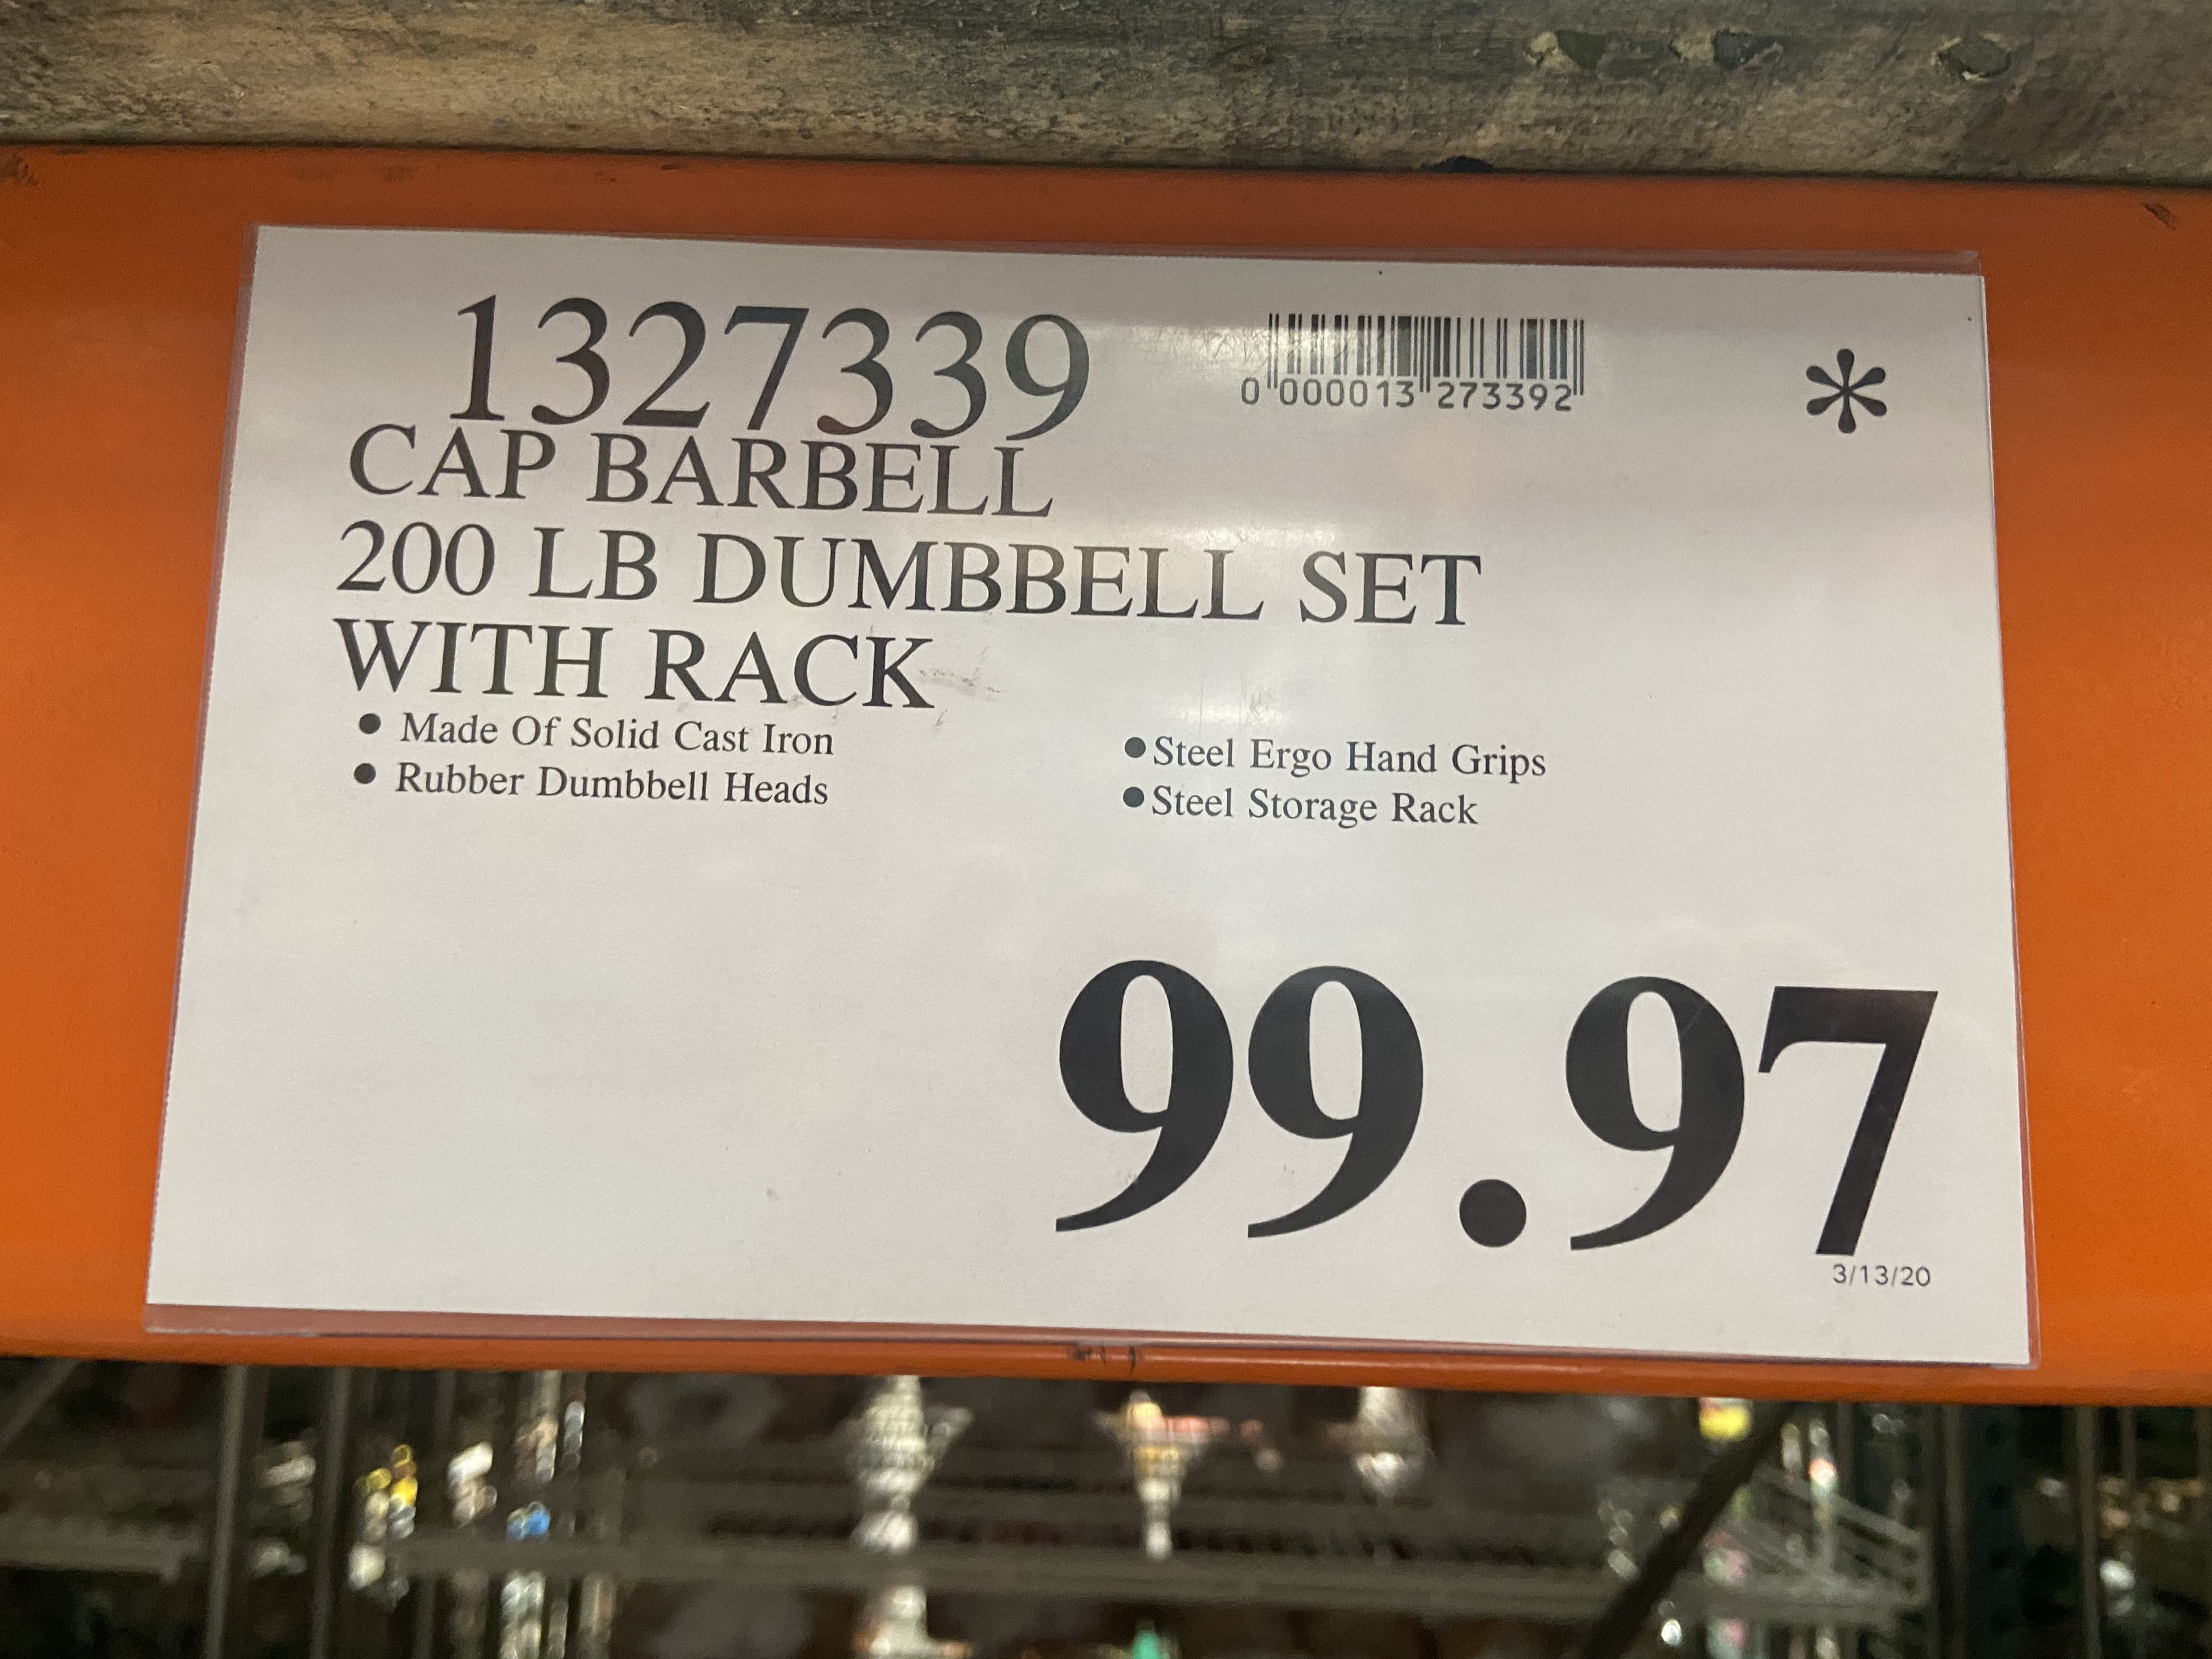 Cap Dumbbells 200lb weight set with rack clearanced at Costco for $99 B&M only YMMV